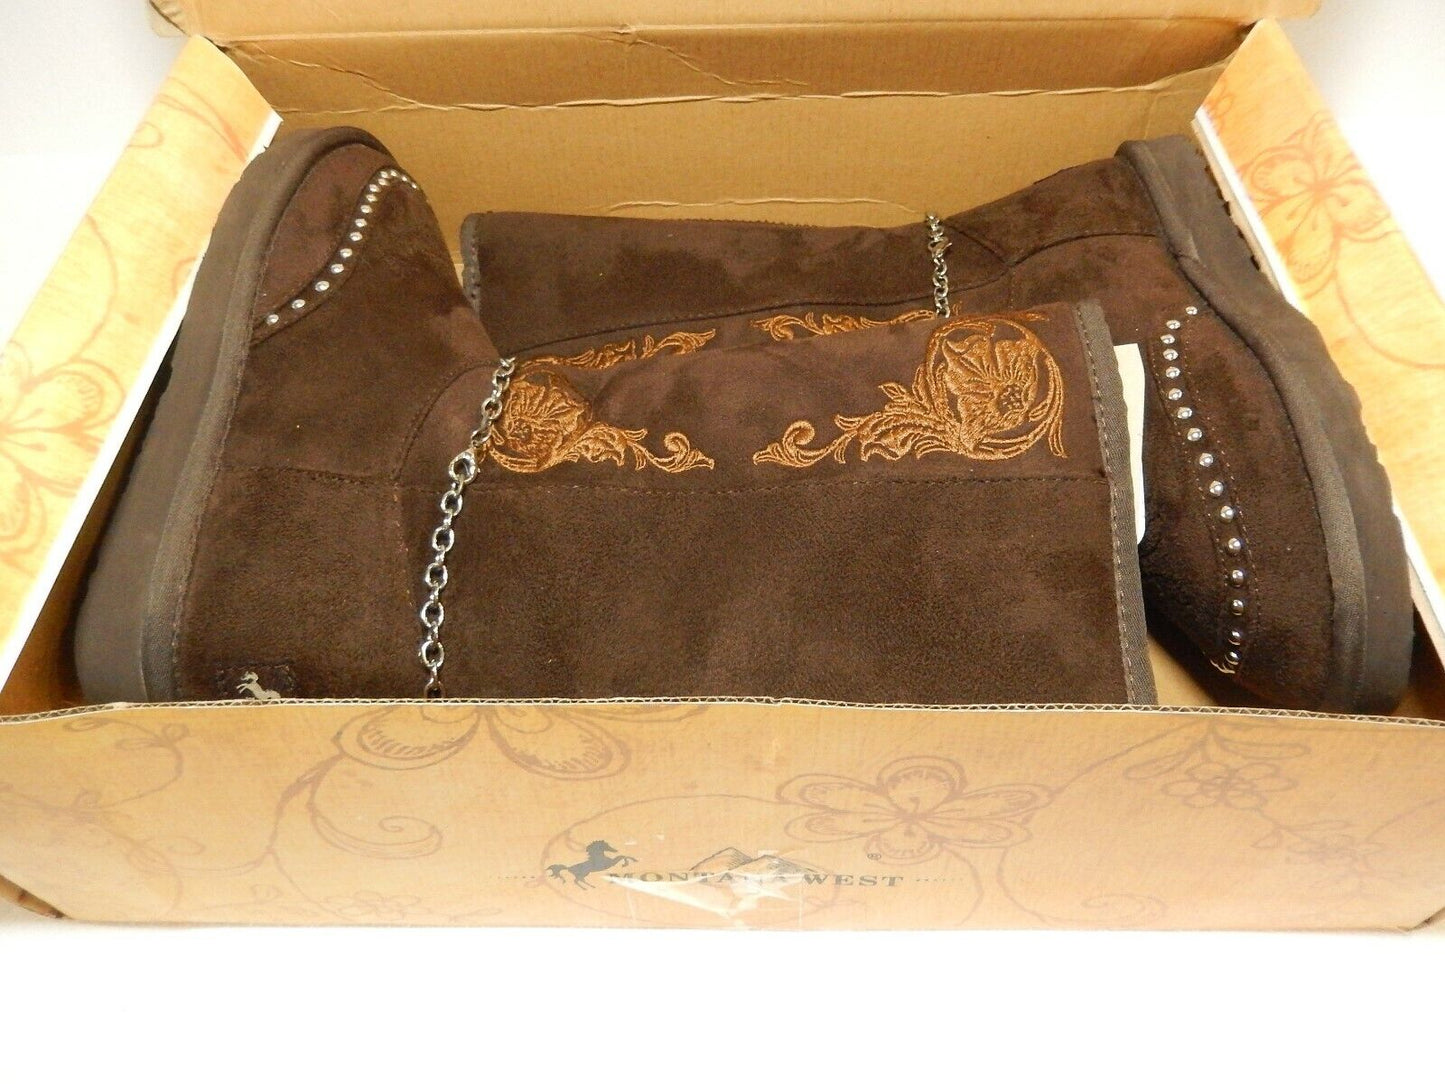 *NIB* Montana West Embroidered Collection Boots BST-021 BR CROSS BOOT CHAIN Sz 6